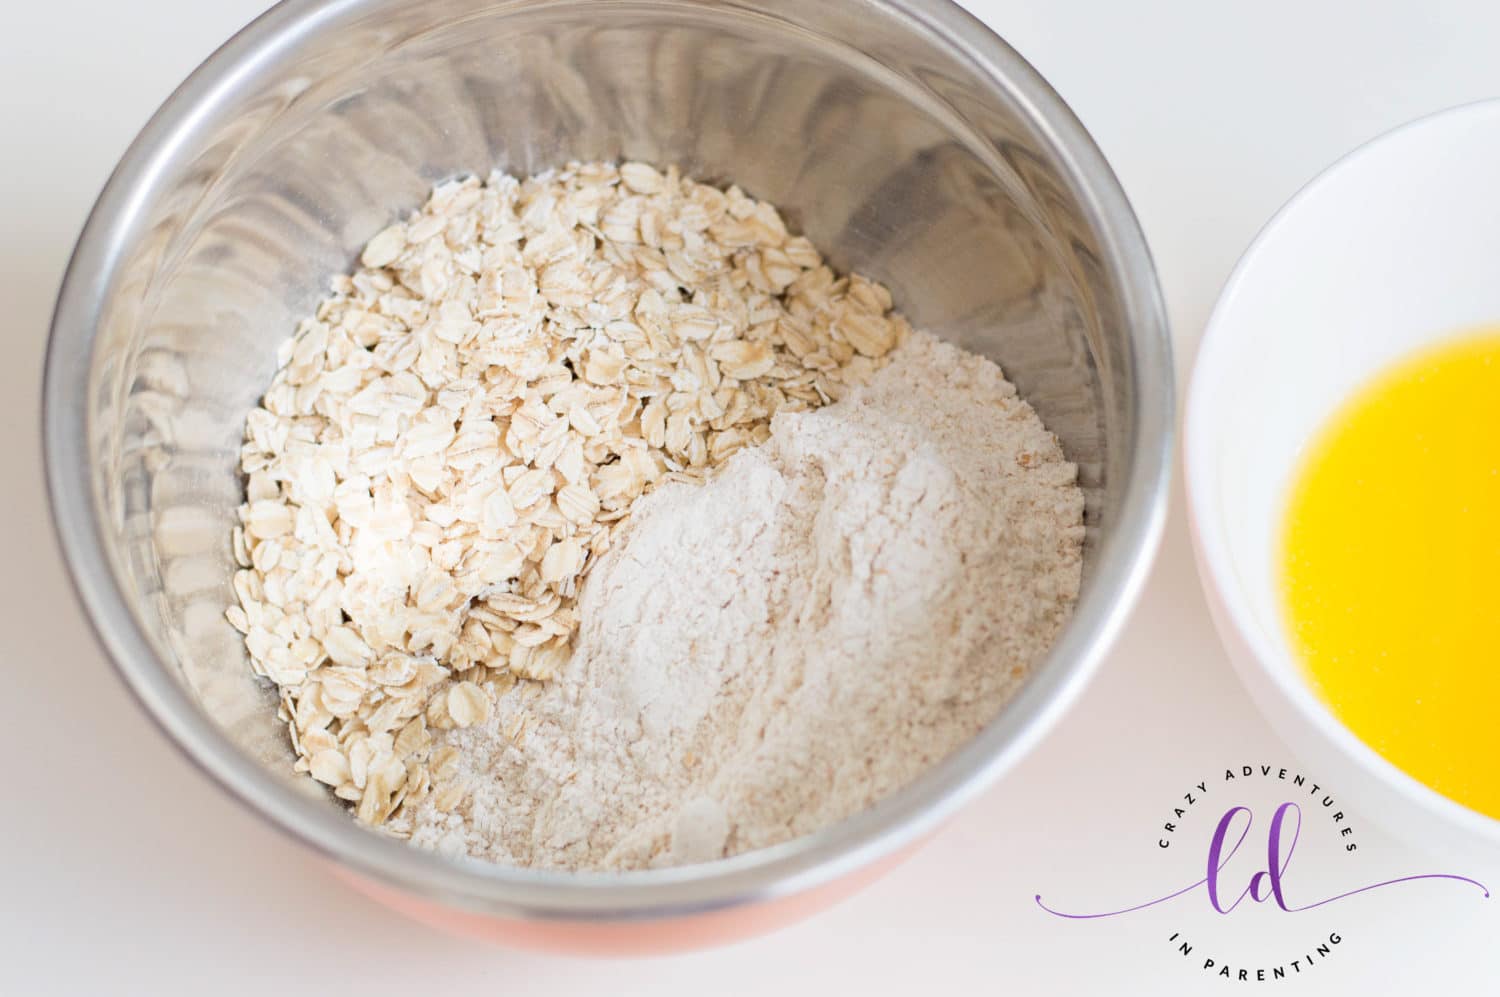 Sift Flour and Add Oatmeal to Bowl for Healthy Berry Muffins